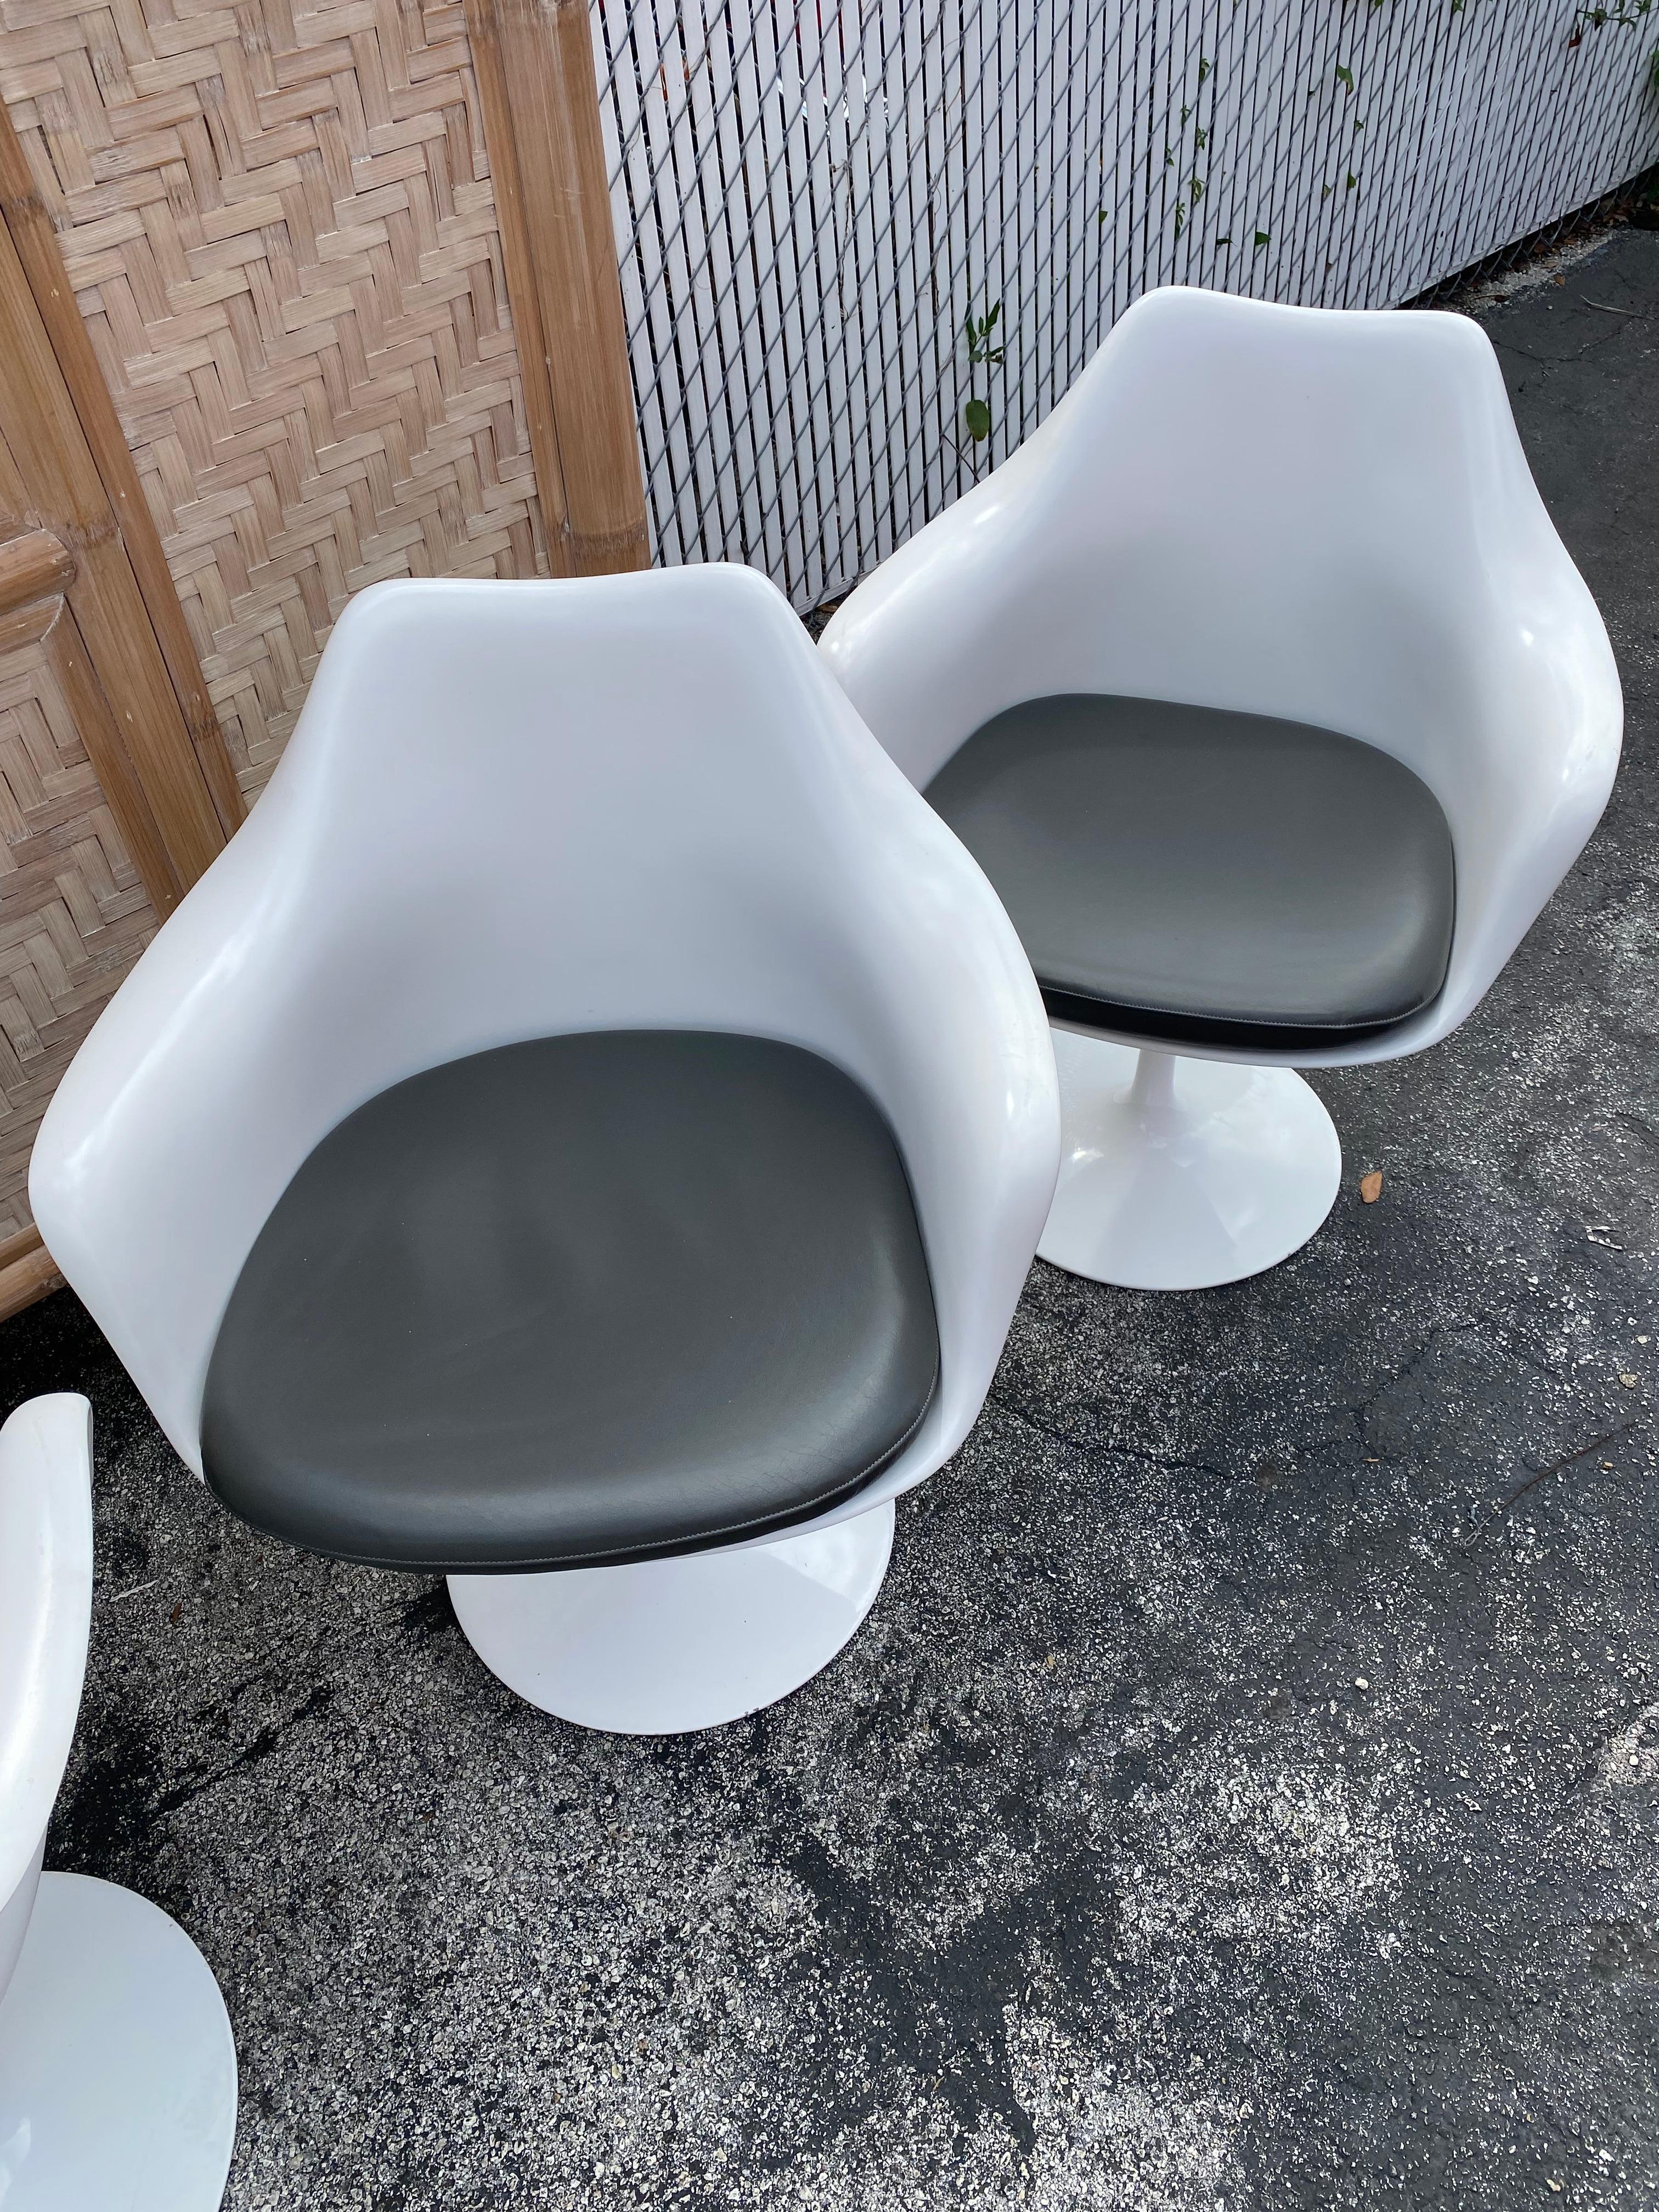 1970s Swivel Tulip Leather Chairs Eero Saarinen for Knoll, Set of 4 In Good Condition For Sale In Fort Lauderdale, FL